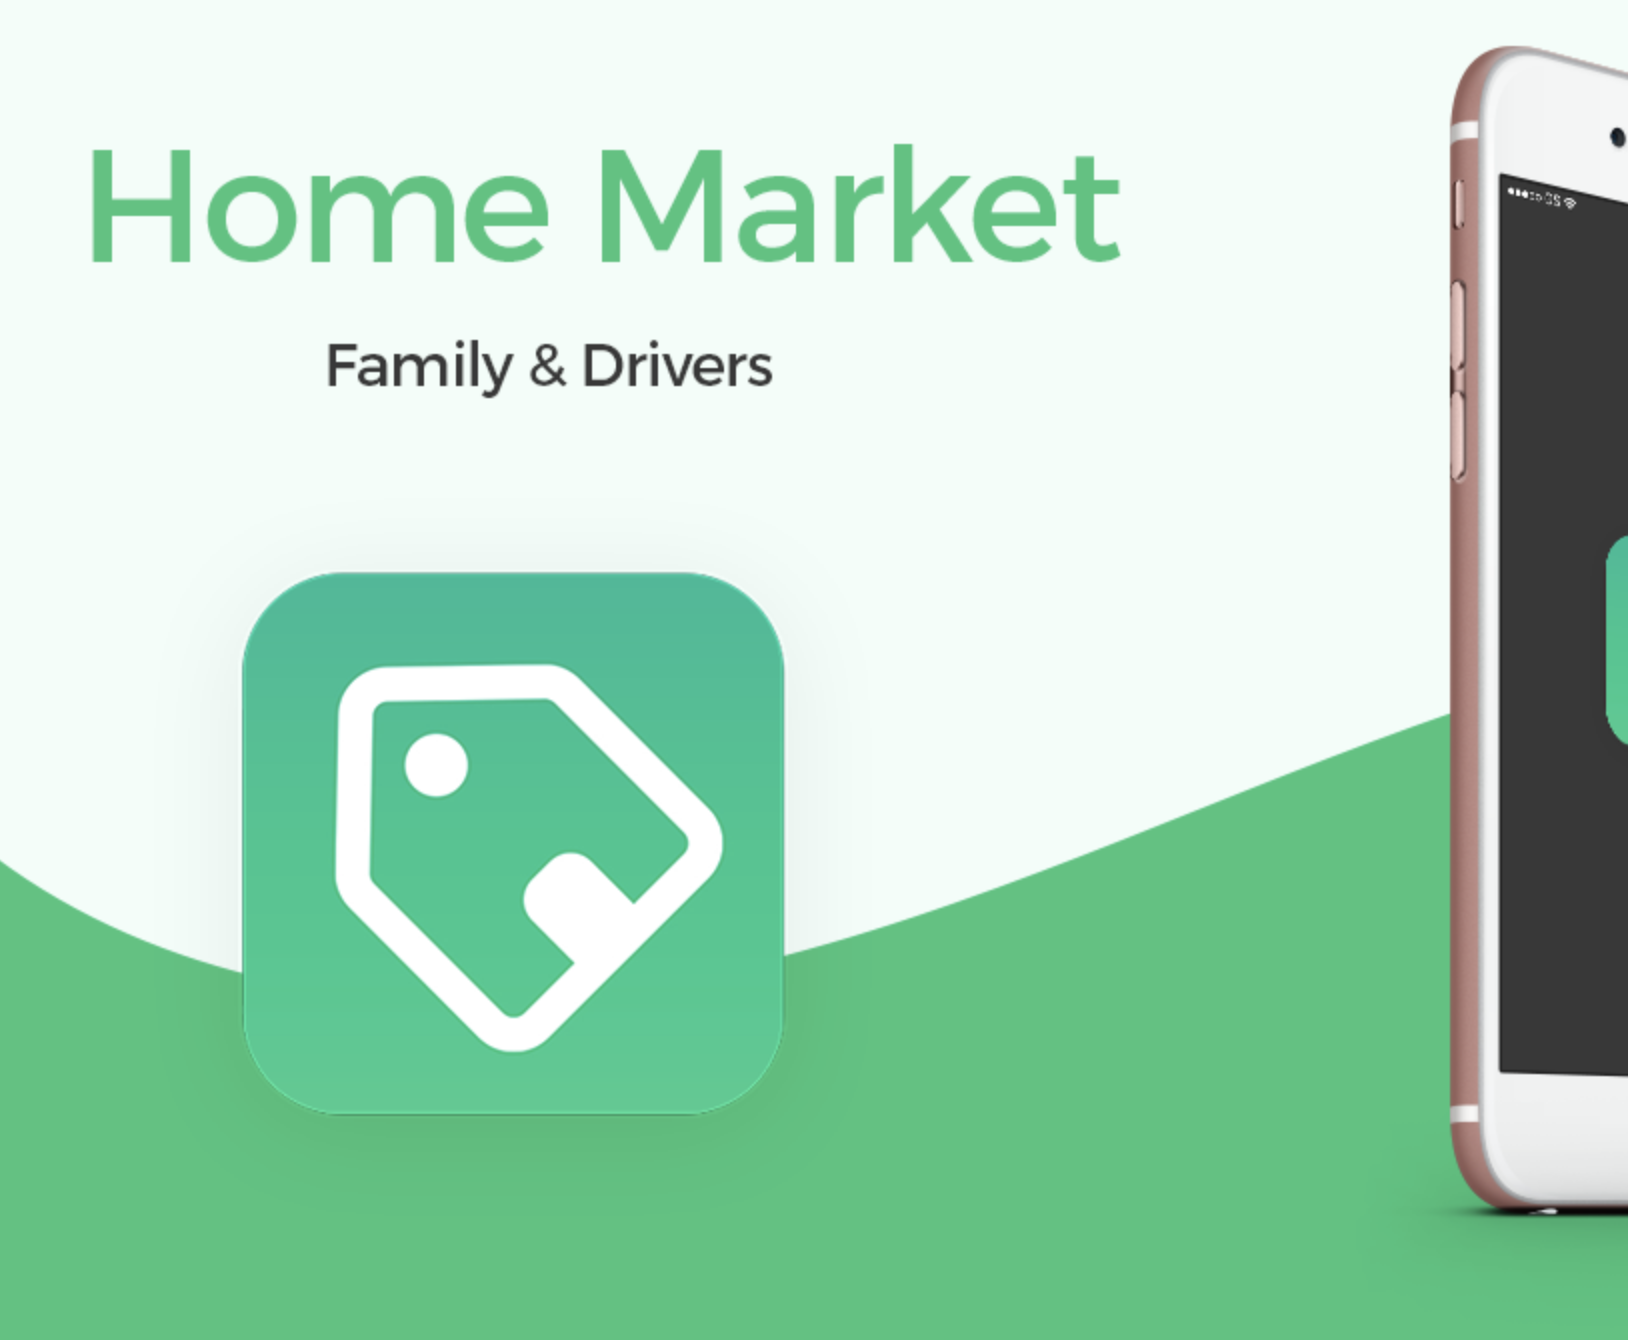 A mobile application that helps productive families and drivers get better work.